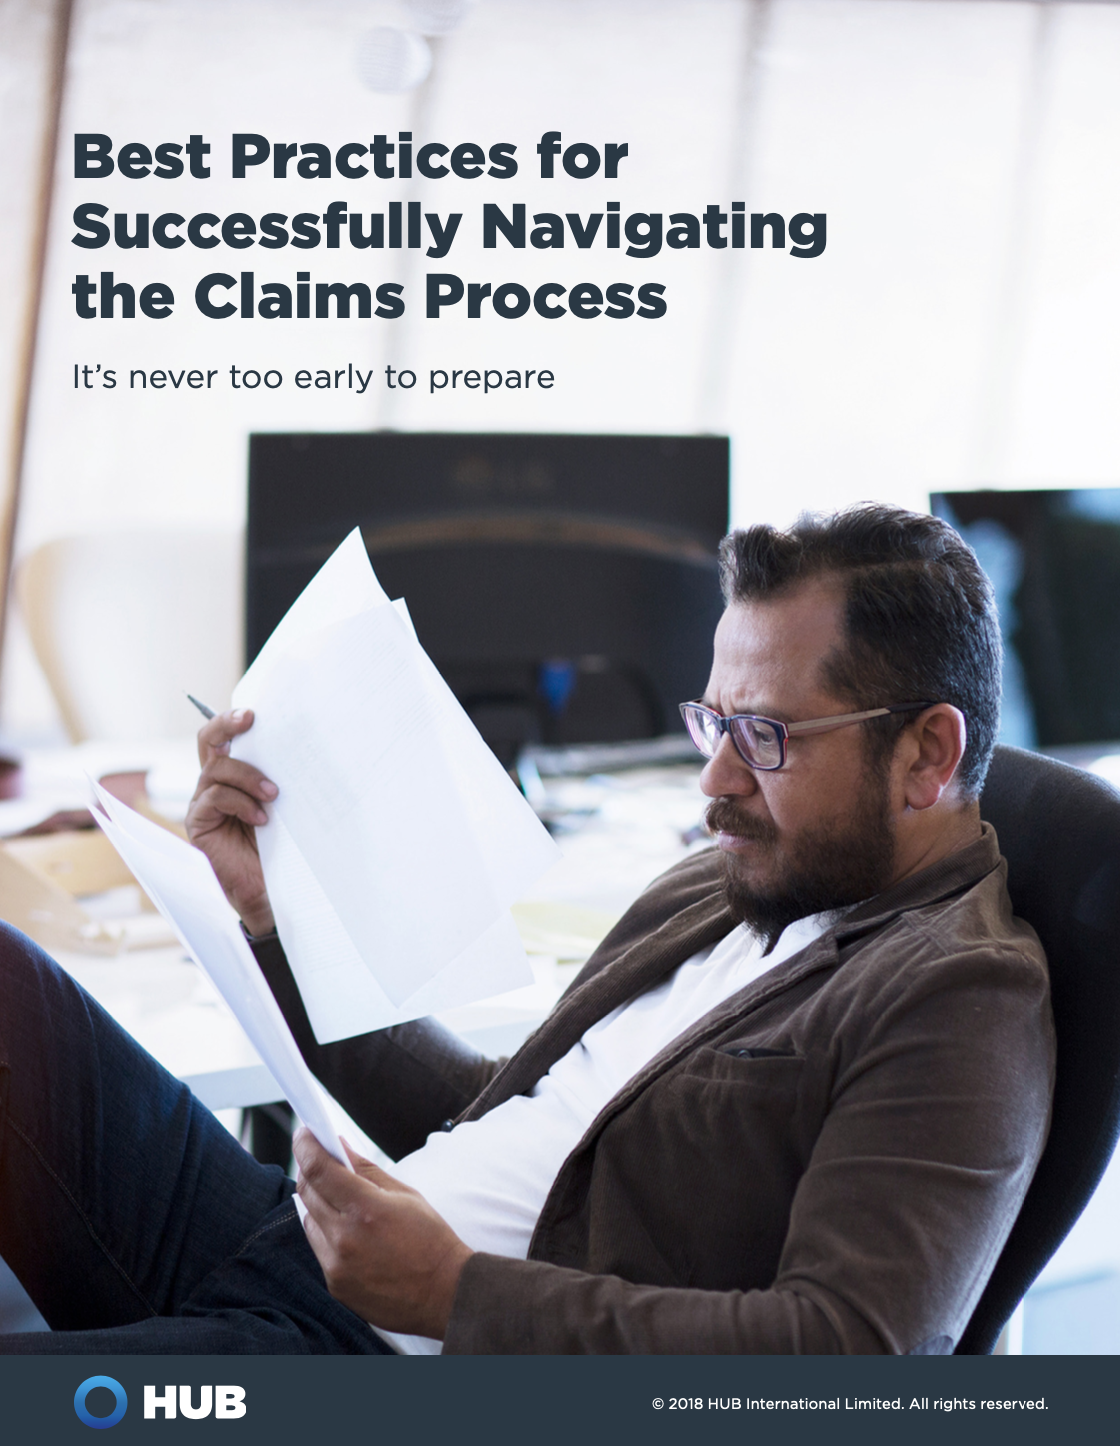 Best Practices for Successfully Navigating the Claims Process